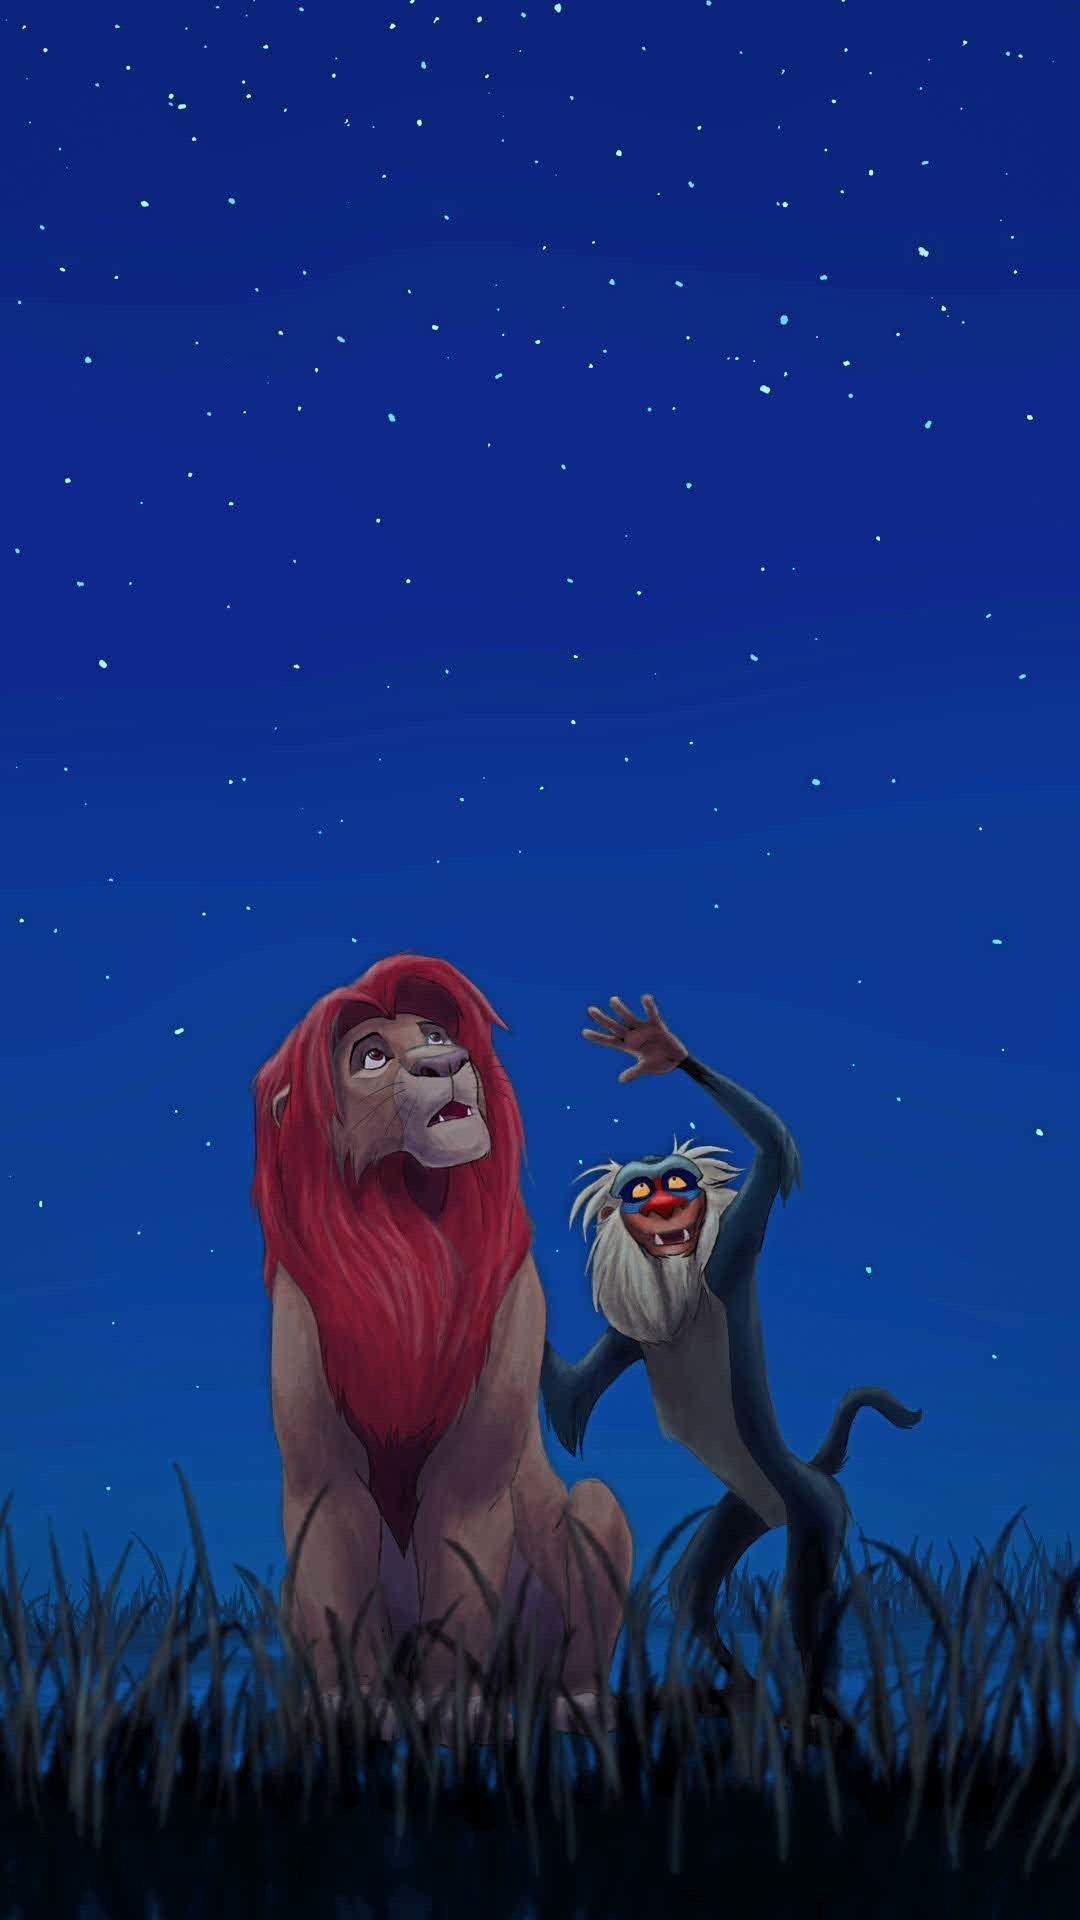 1080x1920 2362x1575 Wpid-andile-gumbi-as-simba  -on-pride-rock-in-the-london-production-of-disneys-the-lion-king-photo-johan-persson-copyright-disney11-hd-cartoon-  ...